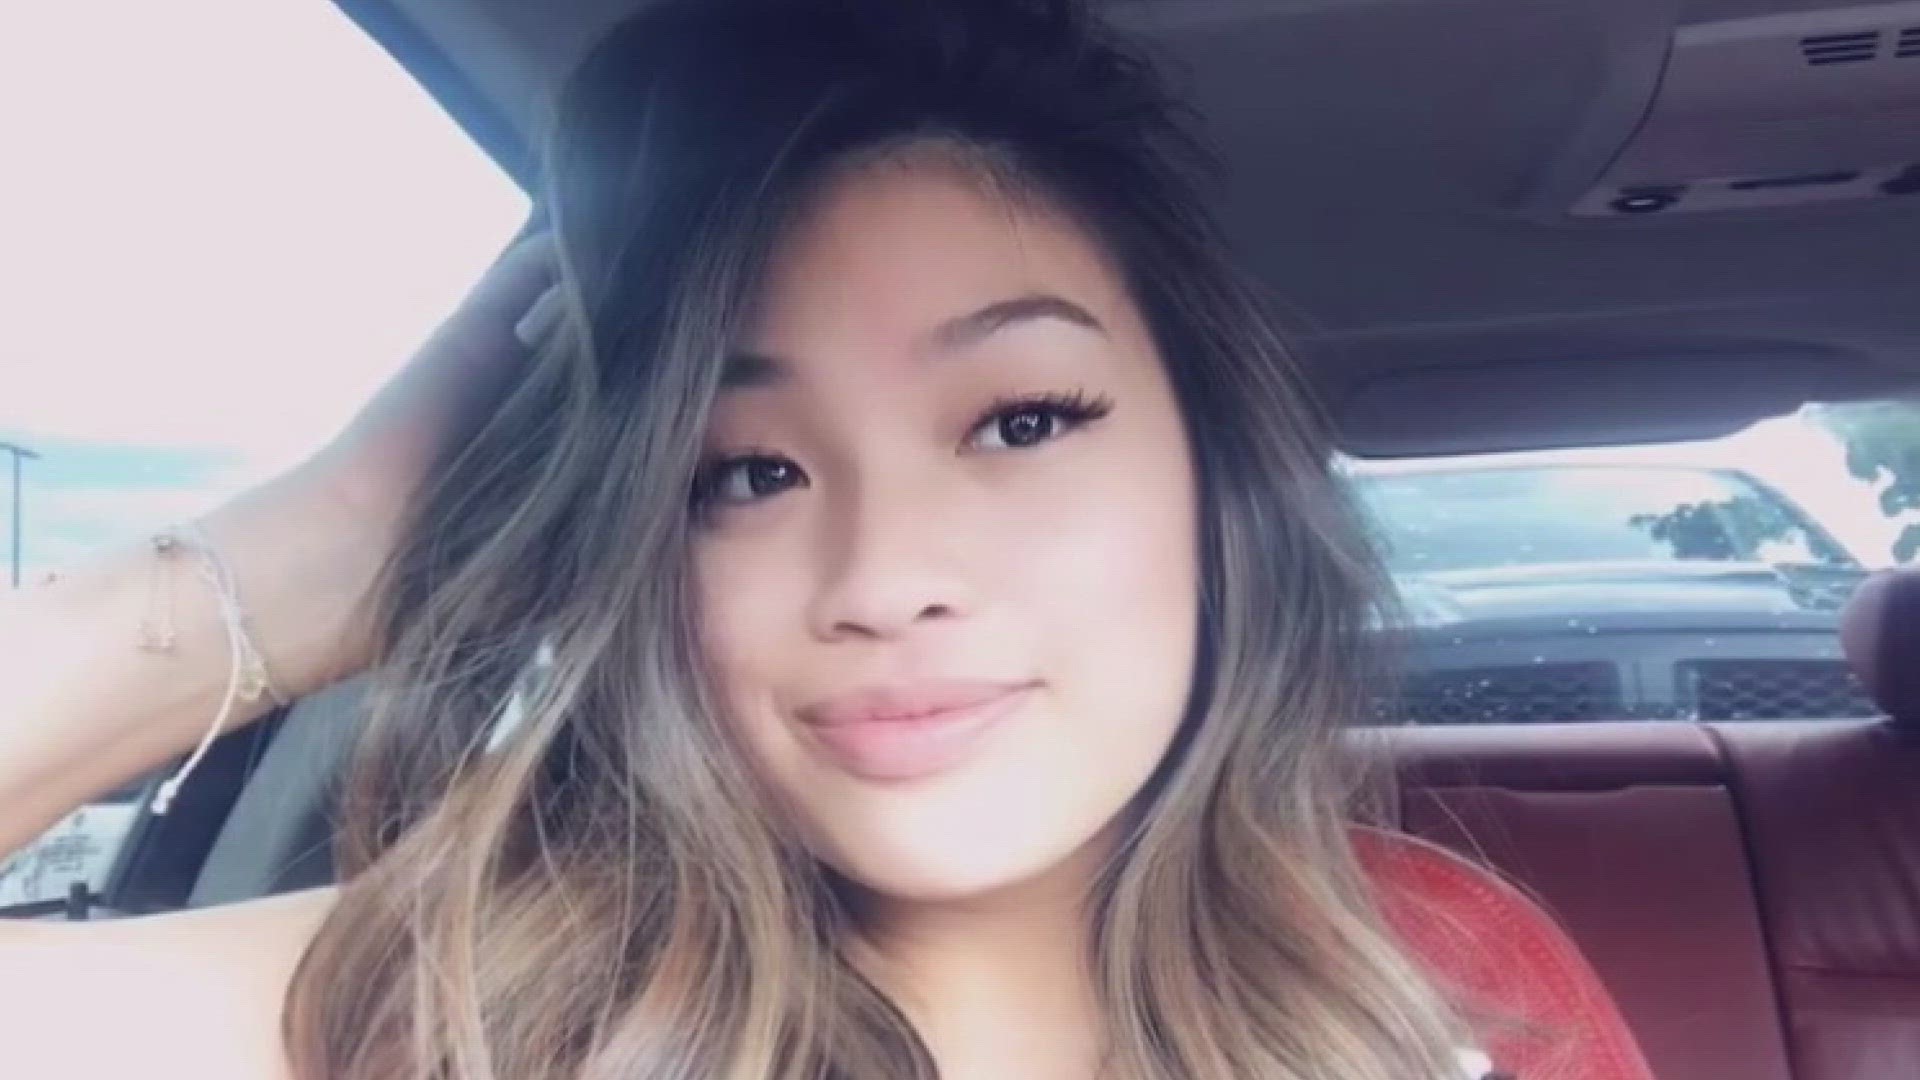 Dr. Geoffrey Kim will spend 15 days in jail and two years on probation for his role in the death of Emmalyn Nguyen in 2019.